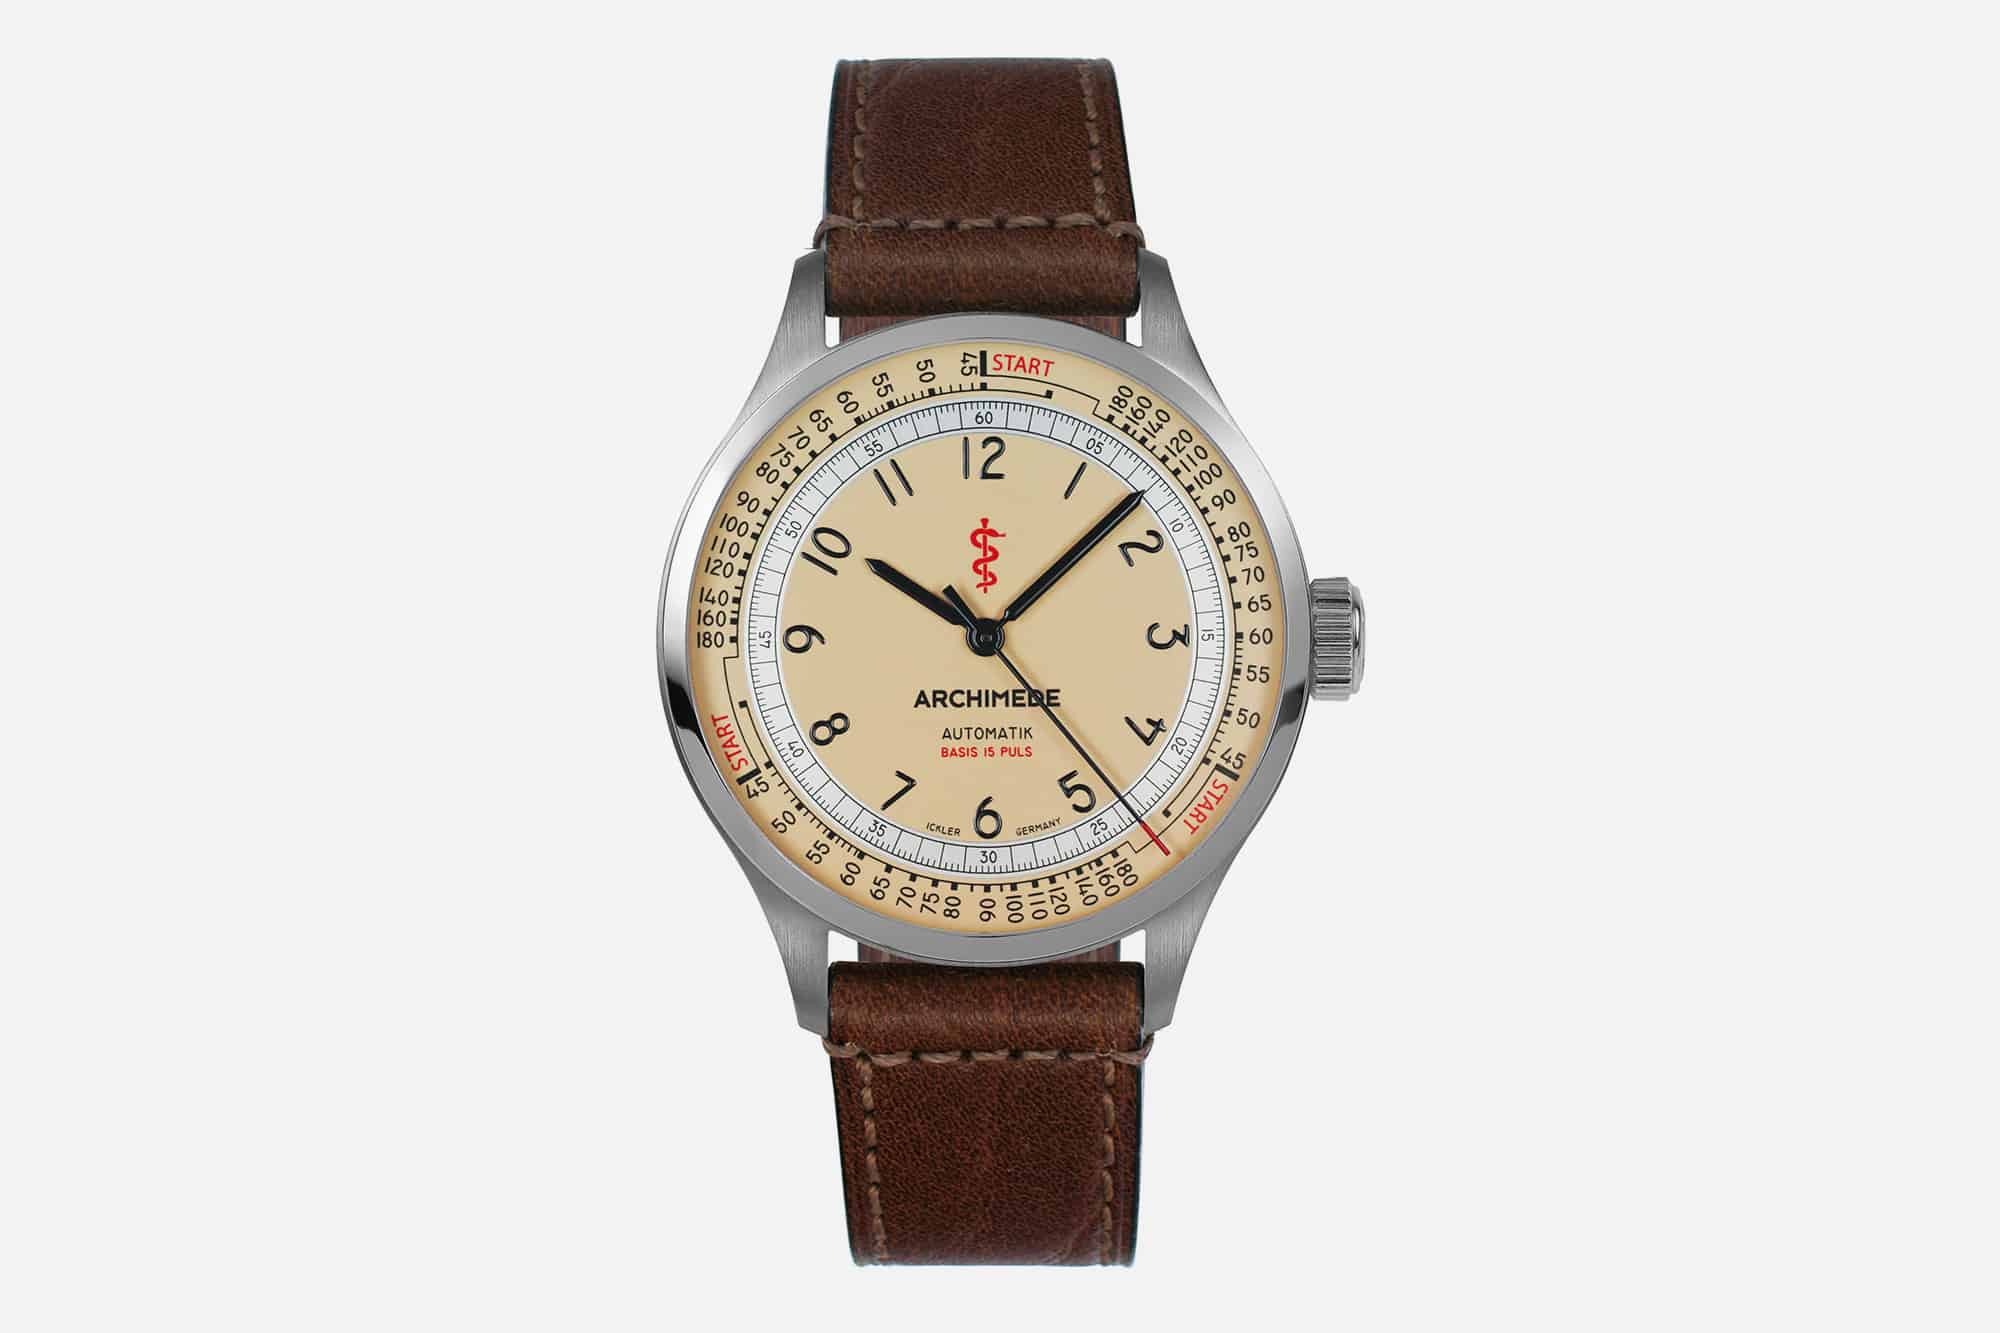 Introducing the Archimede Doctor’s Watch